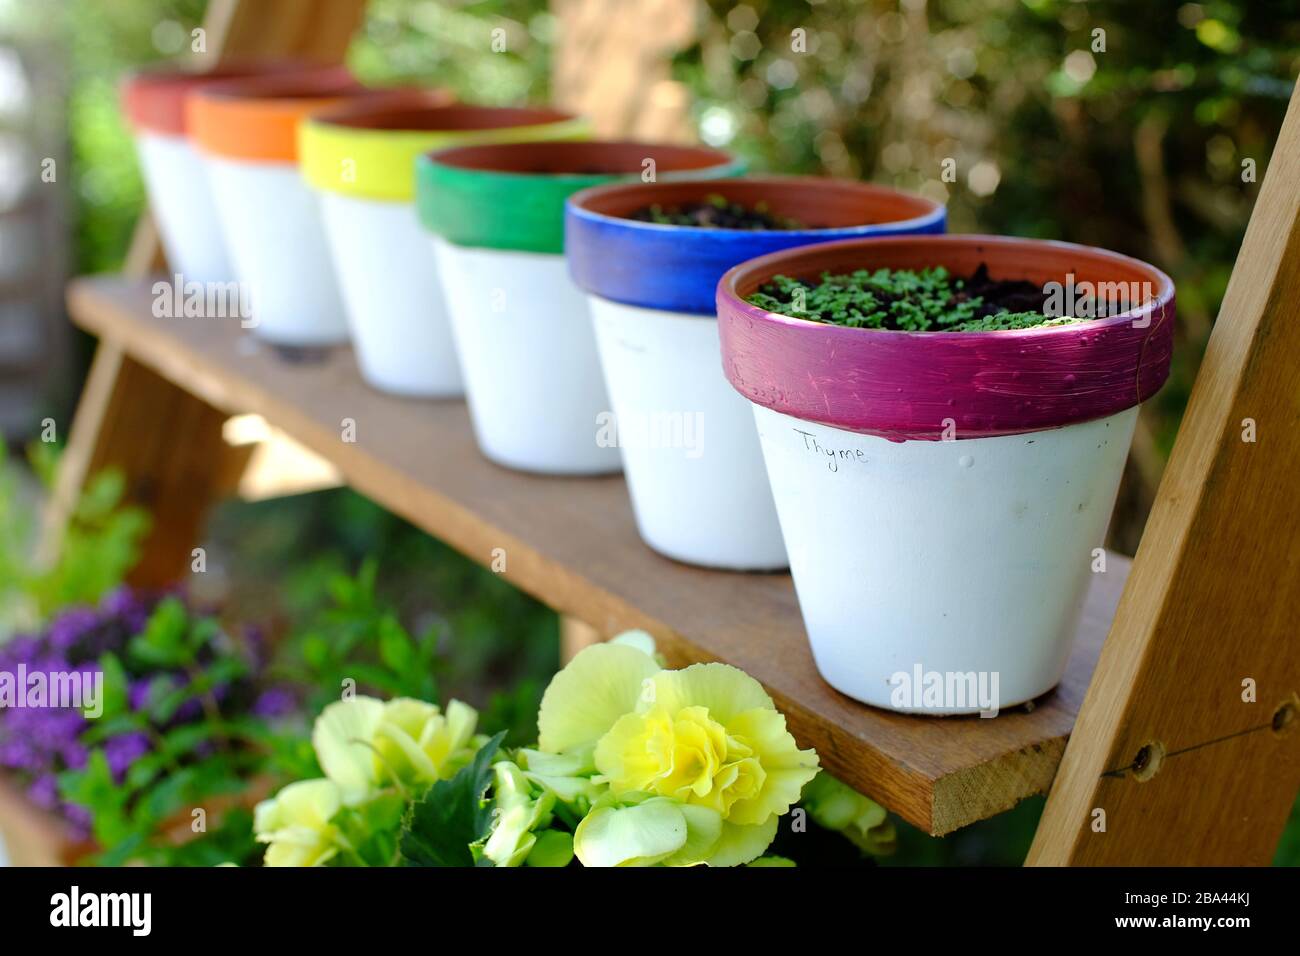 Rainbow coloured home made herb pots Stock Photo